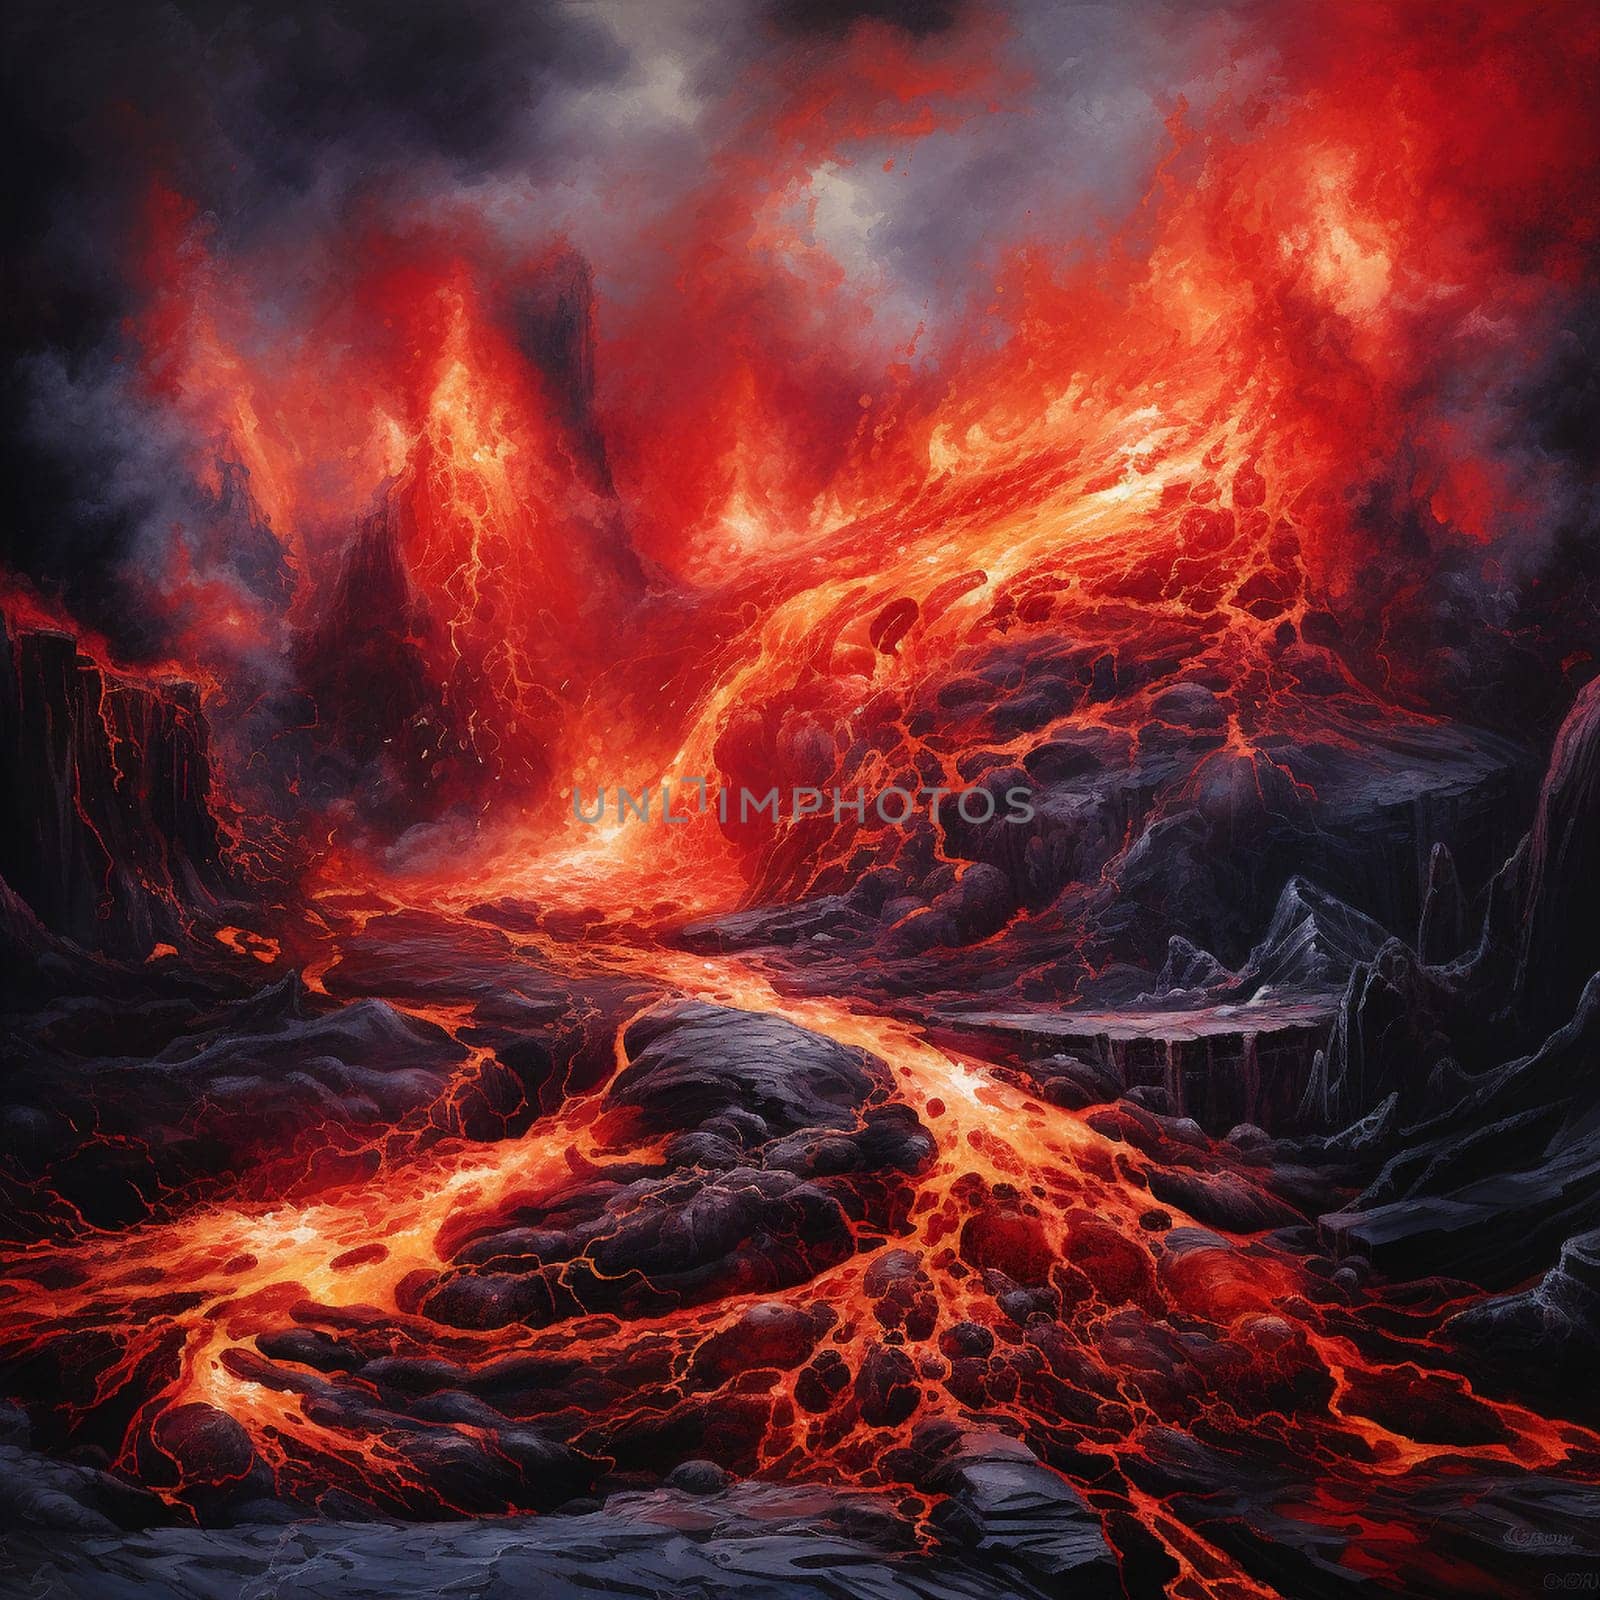 Feel the intense power and unstoppable force of a volcanic eruption with this captivating artwork titled 'Eruption's Torrent'. This art piece captures the raw energy and destruction unleashed during volcanic eruptions. Experience the chaos and beauty of nature as molten lava bursts forth from the Earth's core, engulfing the surroundings in a fiery torrent.